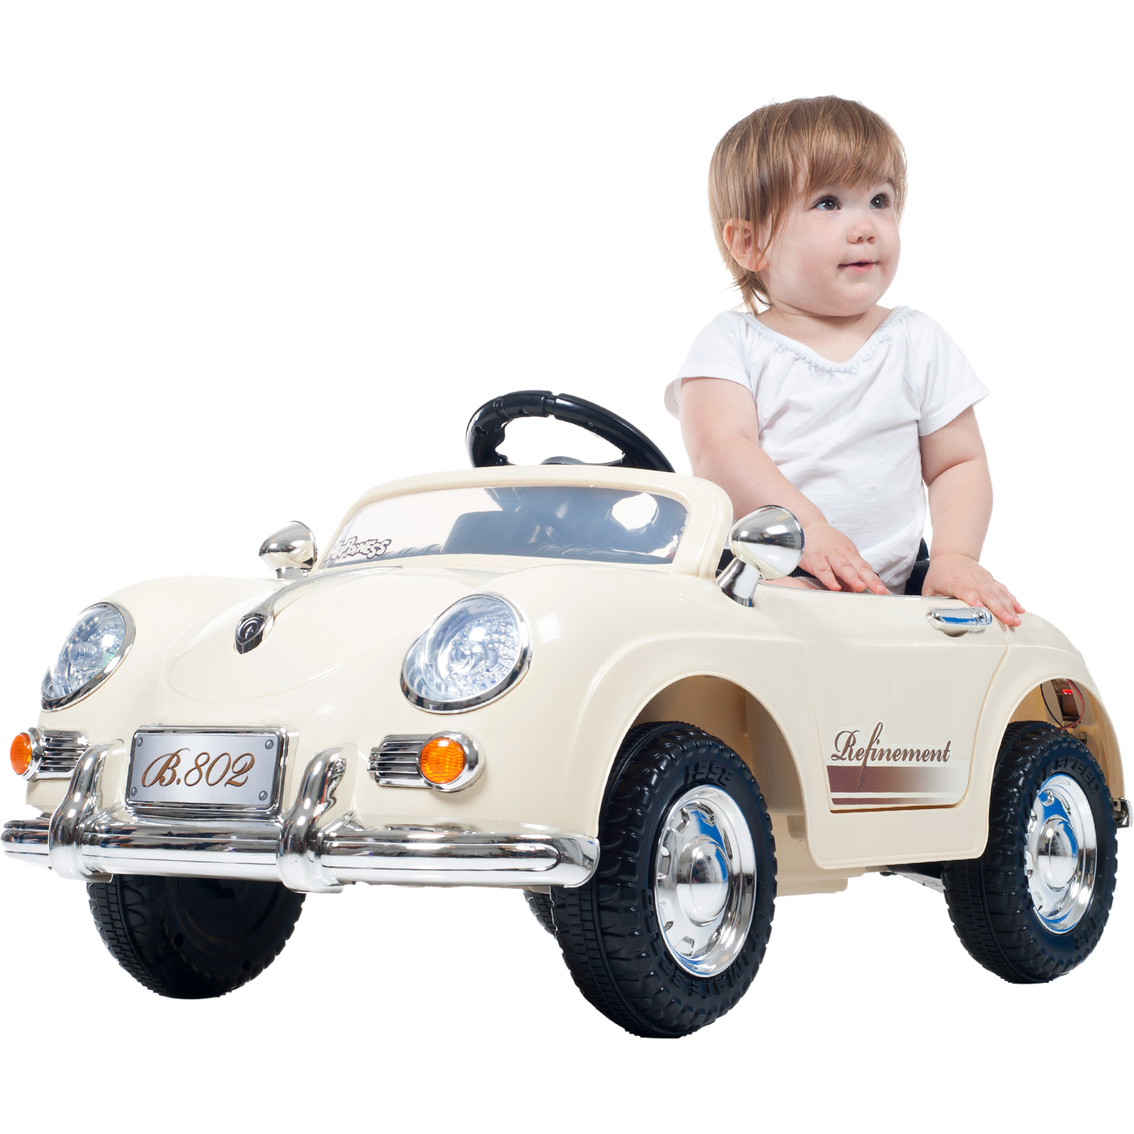 Lil' Rider Ride On Toy Classic Sports Car - Image 3 of 3